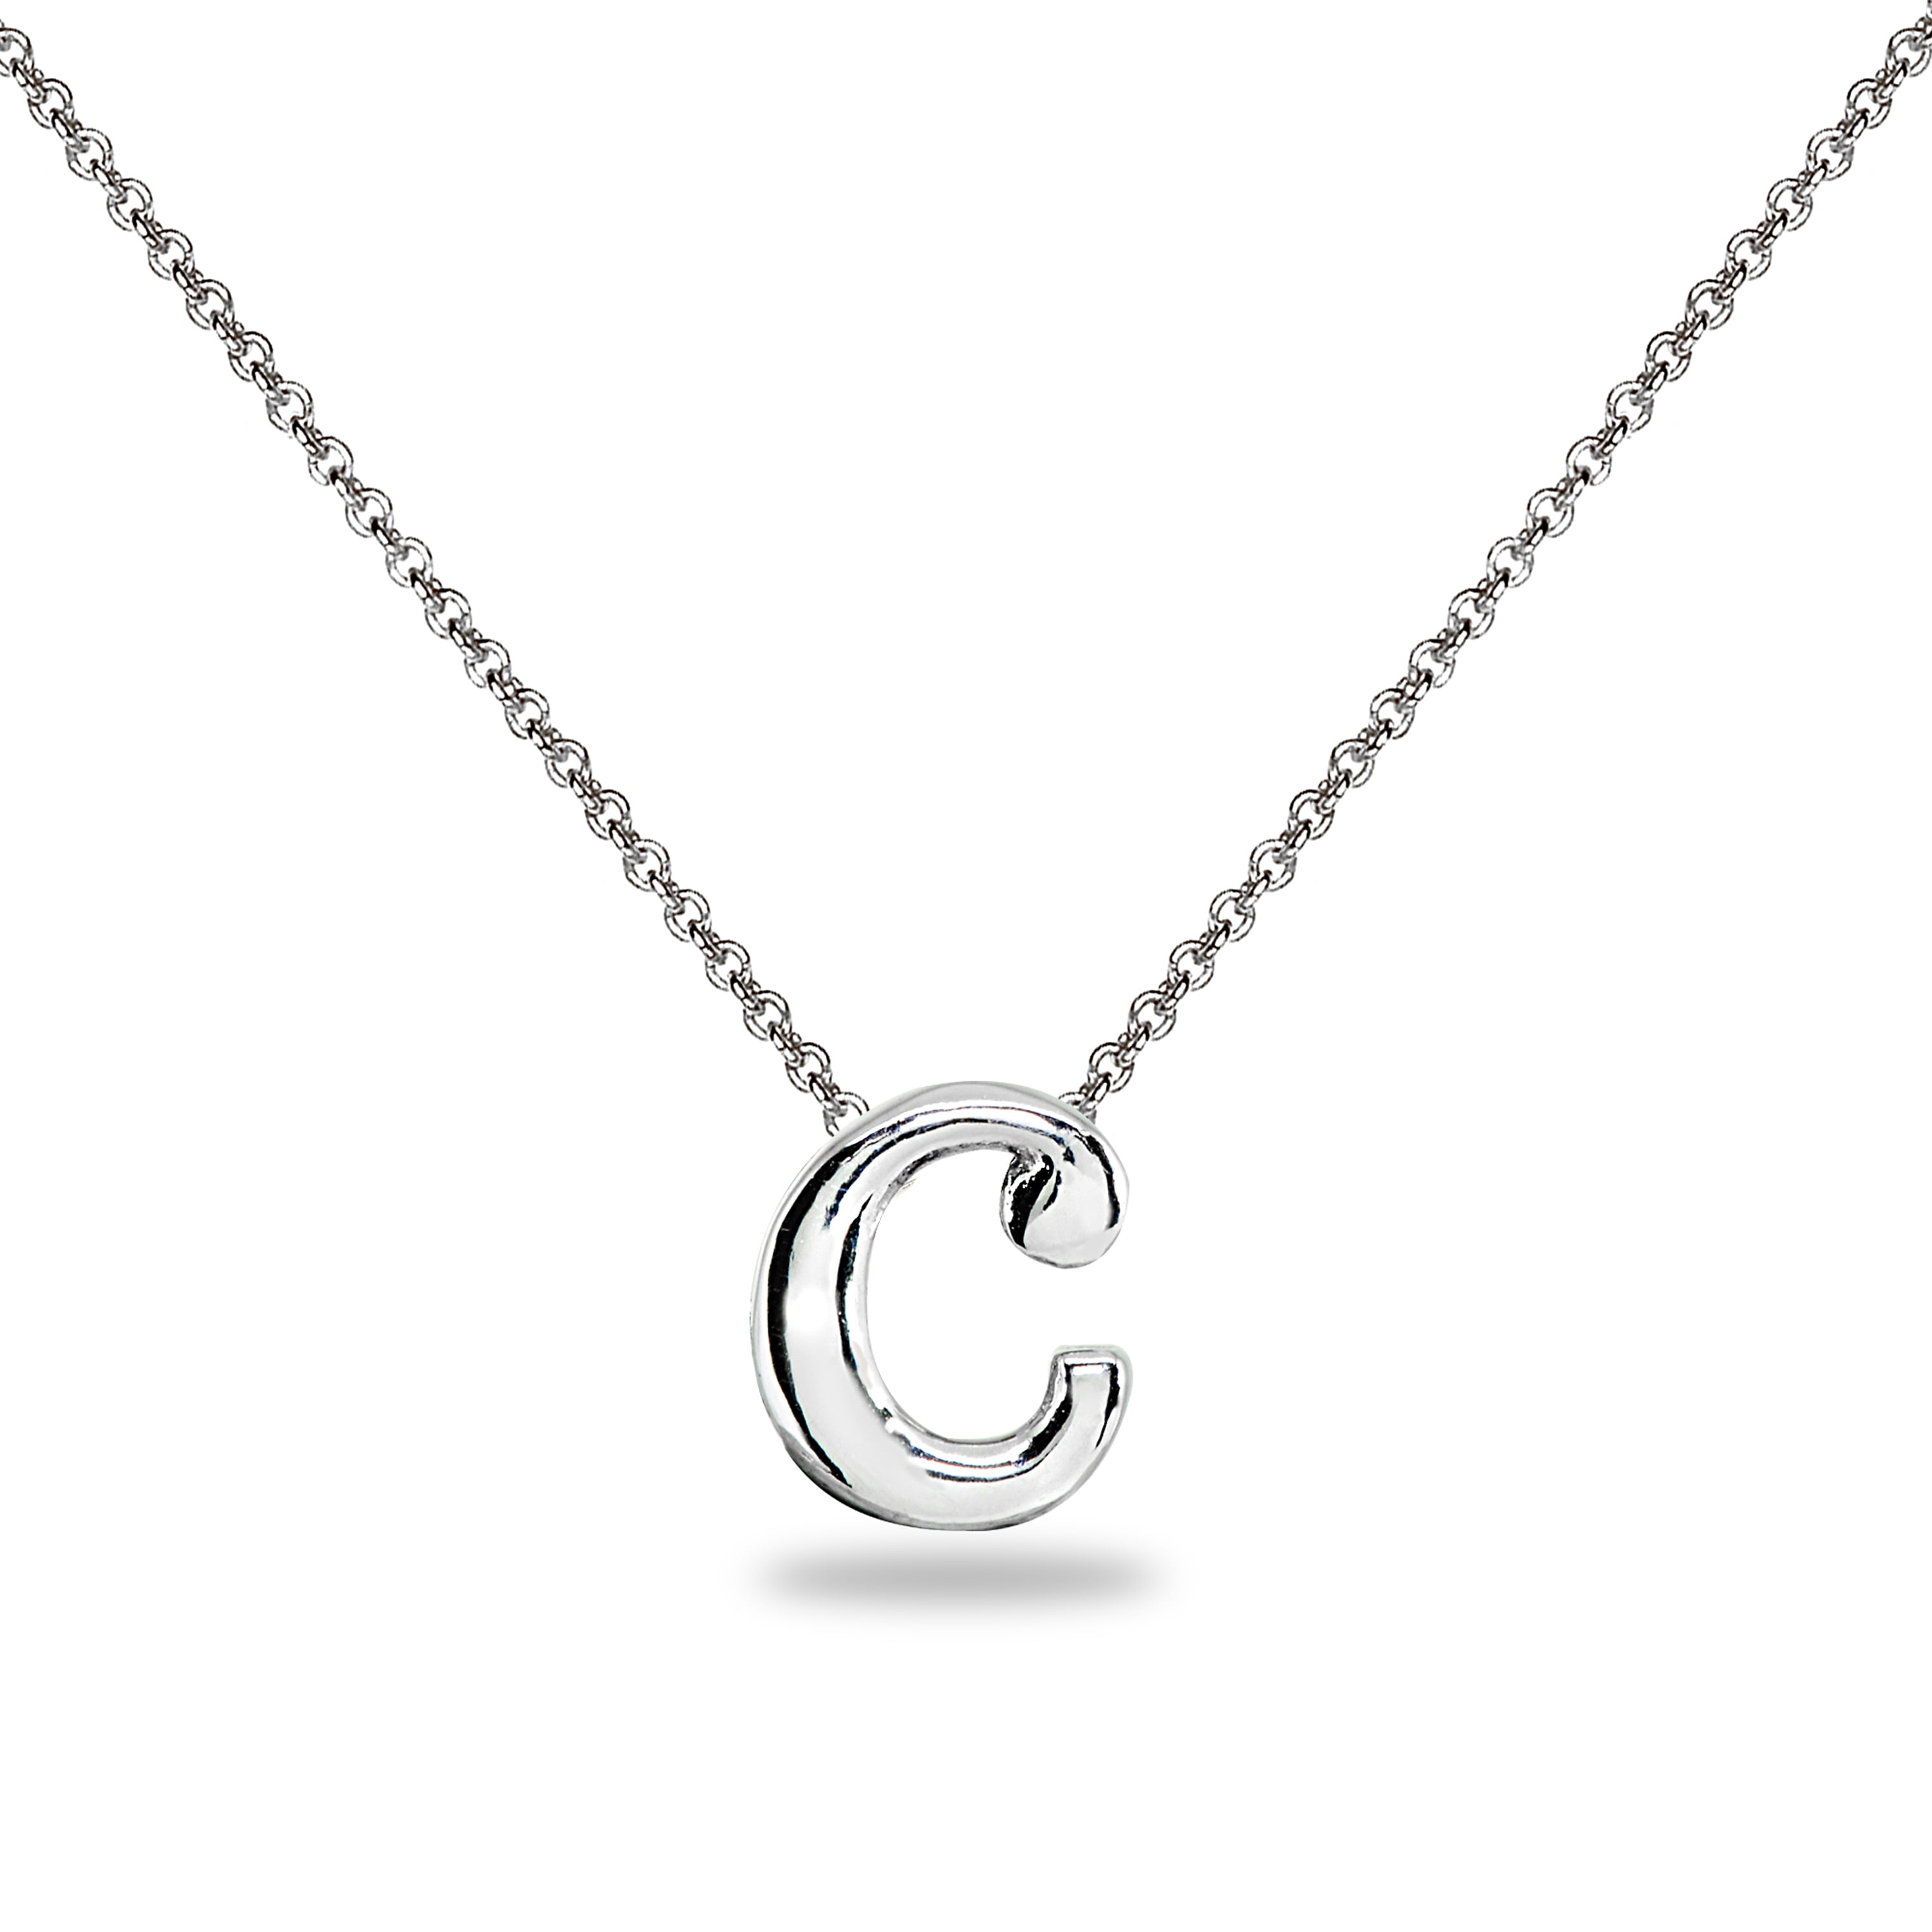 Buy Letter C Pendant Online In India - Etsy India